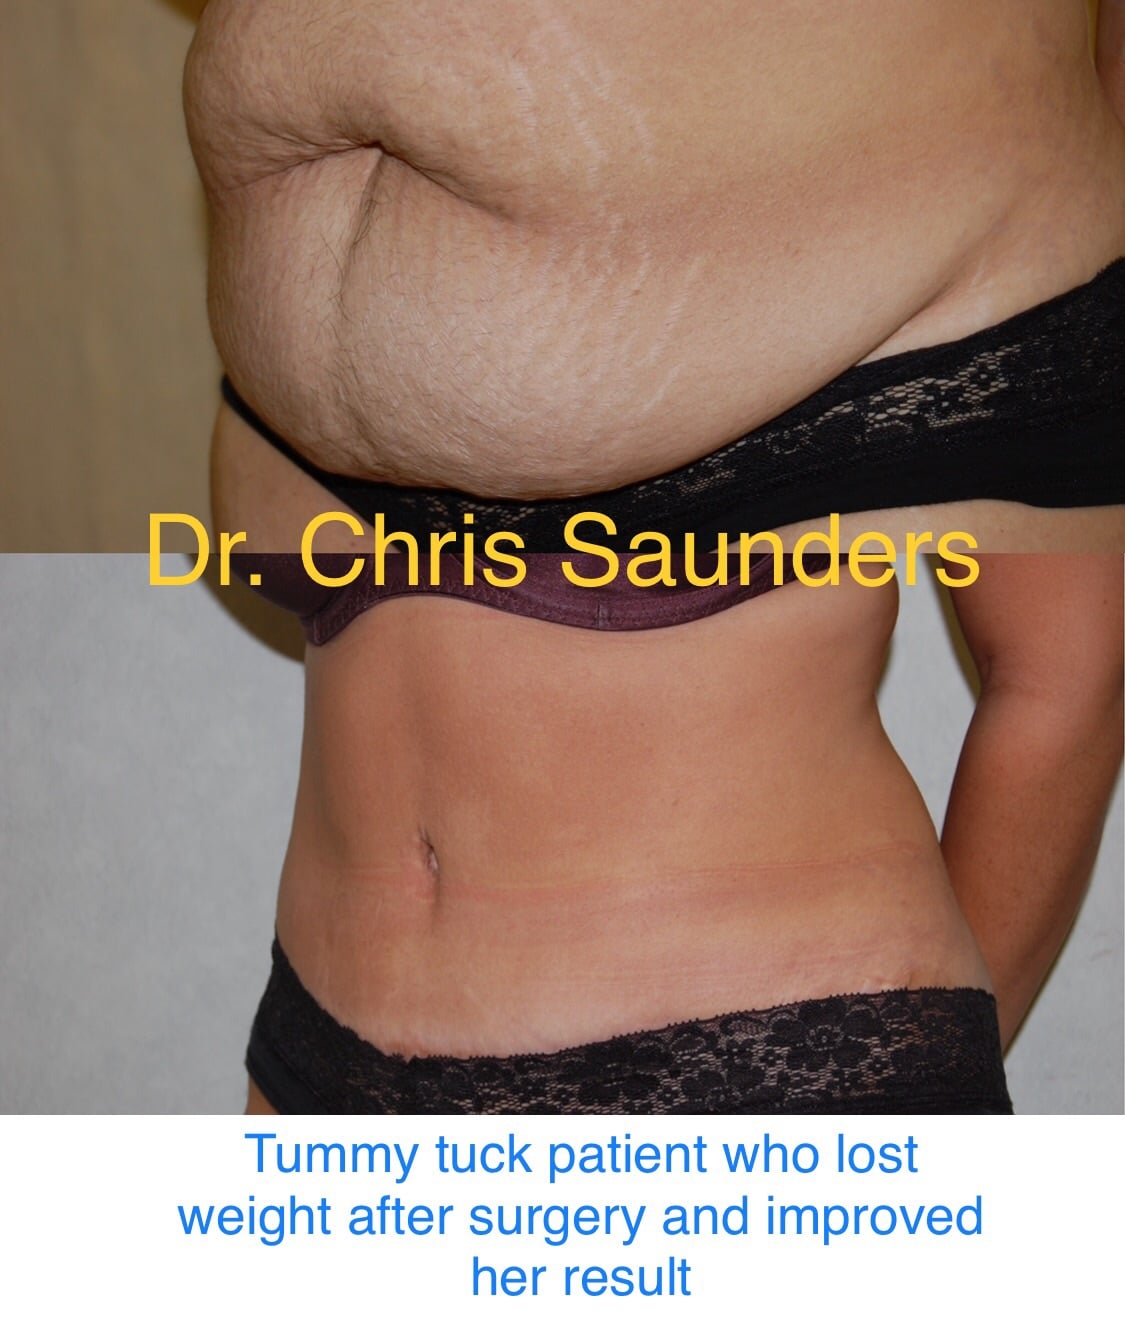 Tummy Tuck and Weight Loss: When is the Best Time to Lose Weight?